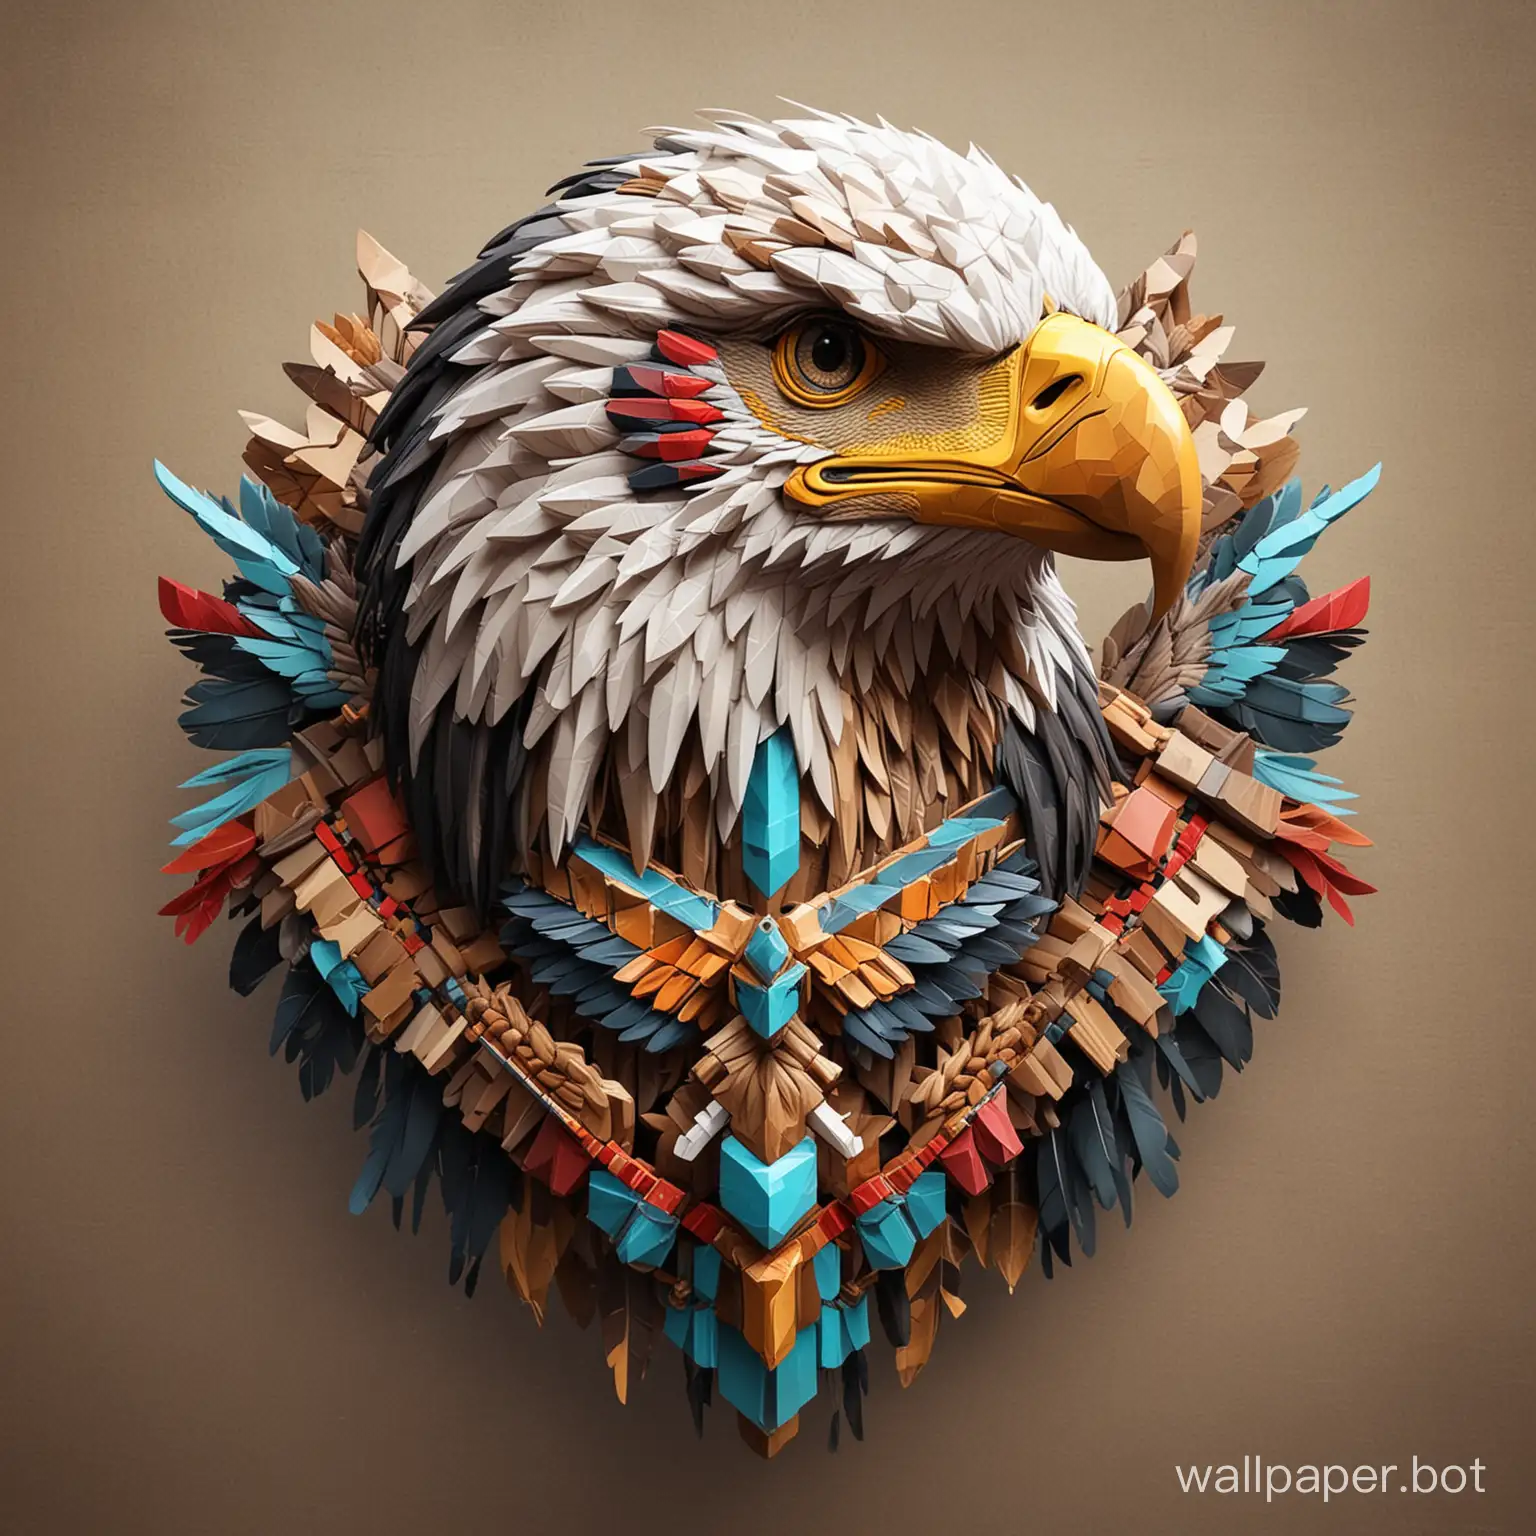 Cubic-Style-Representation-of-the-Native-Spirit-of-the-Eagle